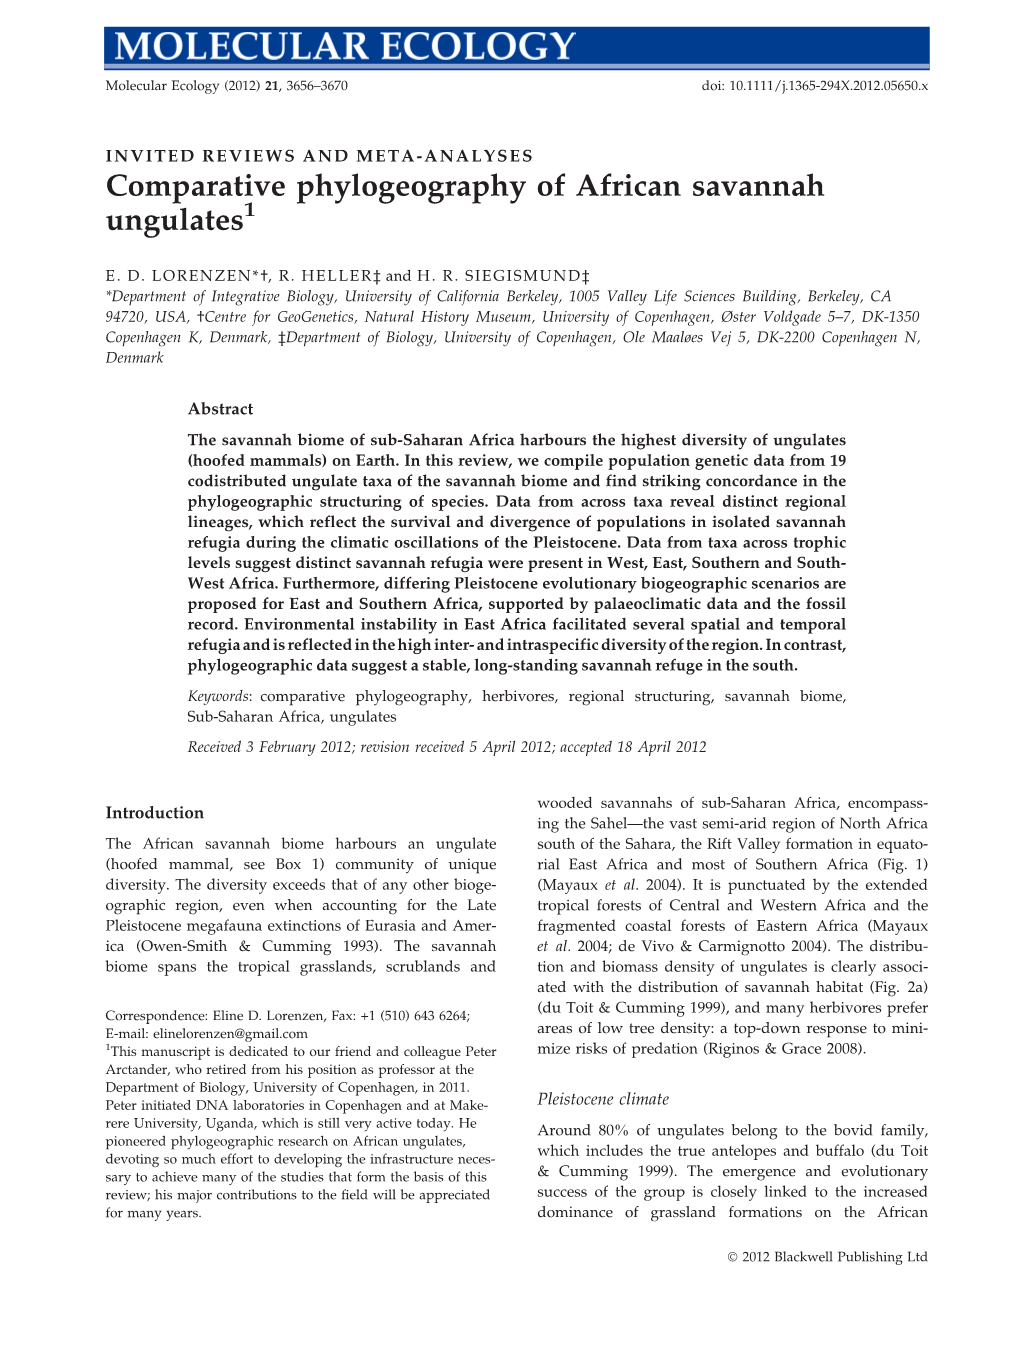 Comparative Phylogeography of African Savannah Ungulates1